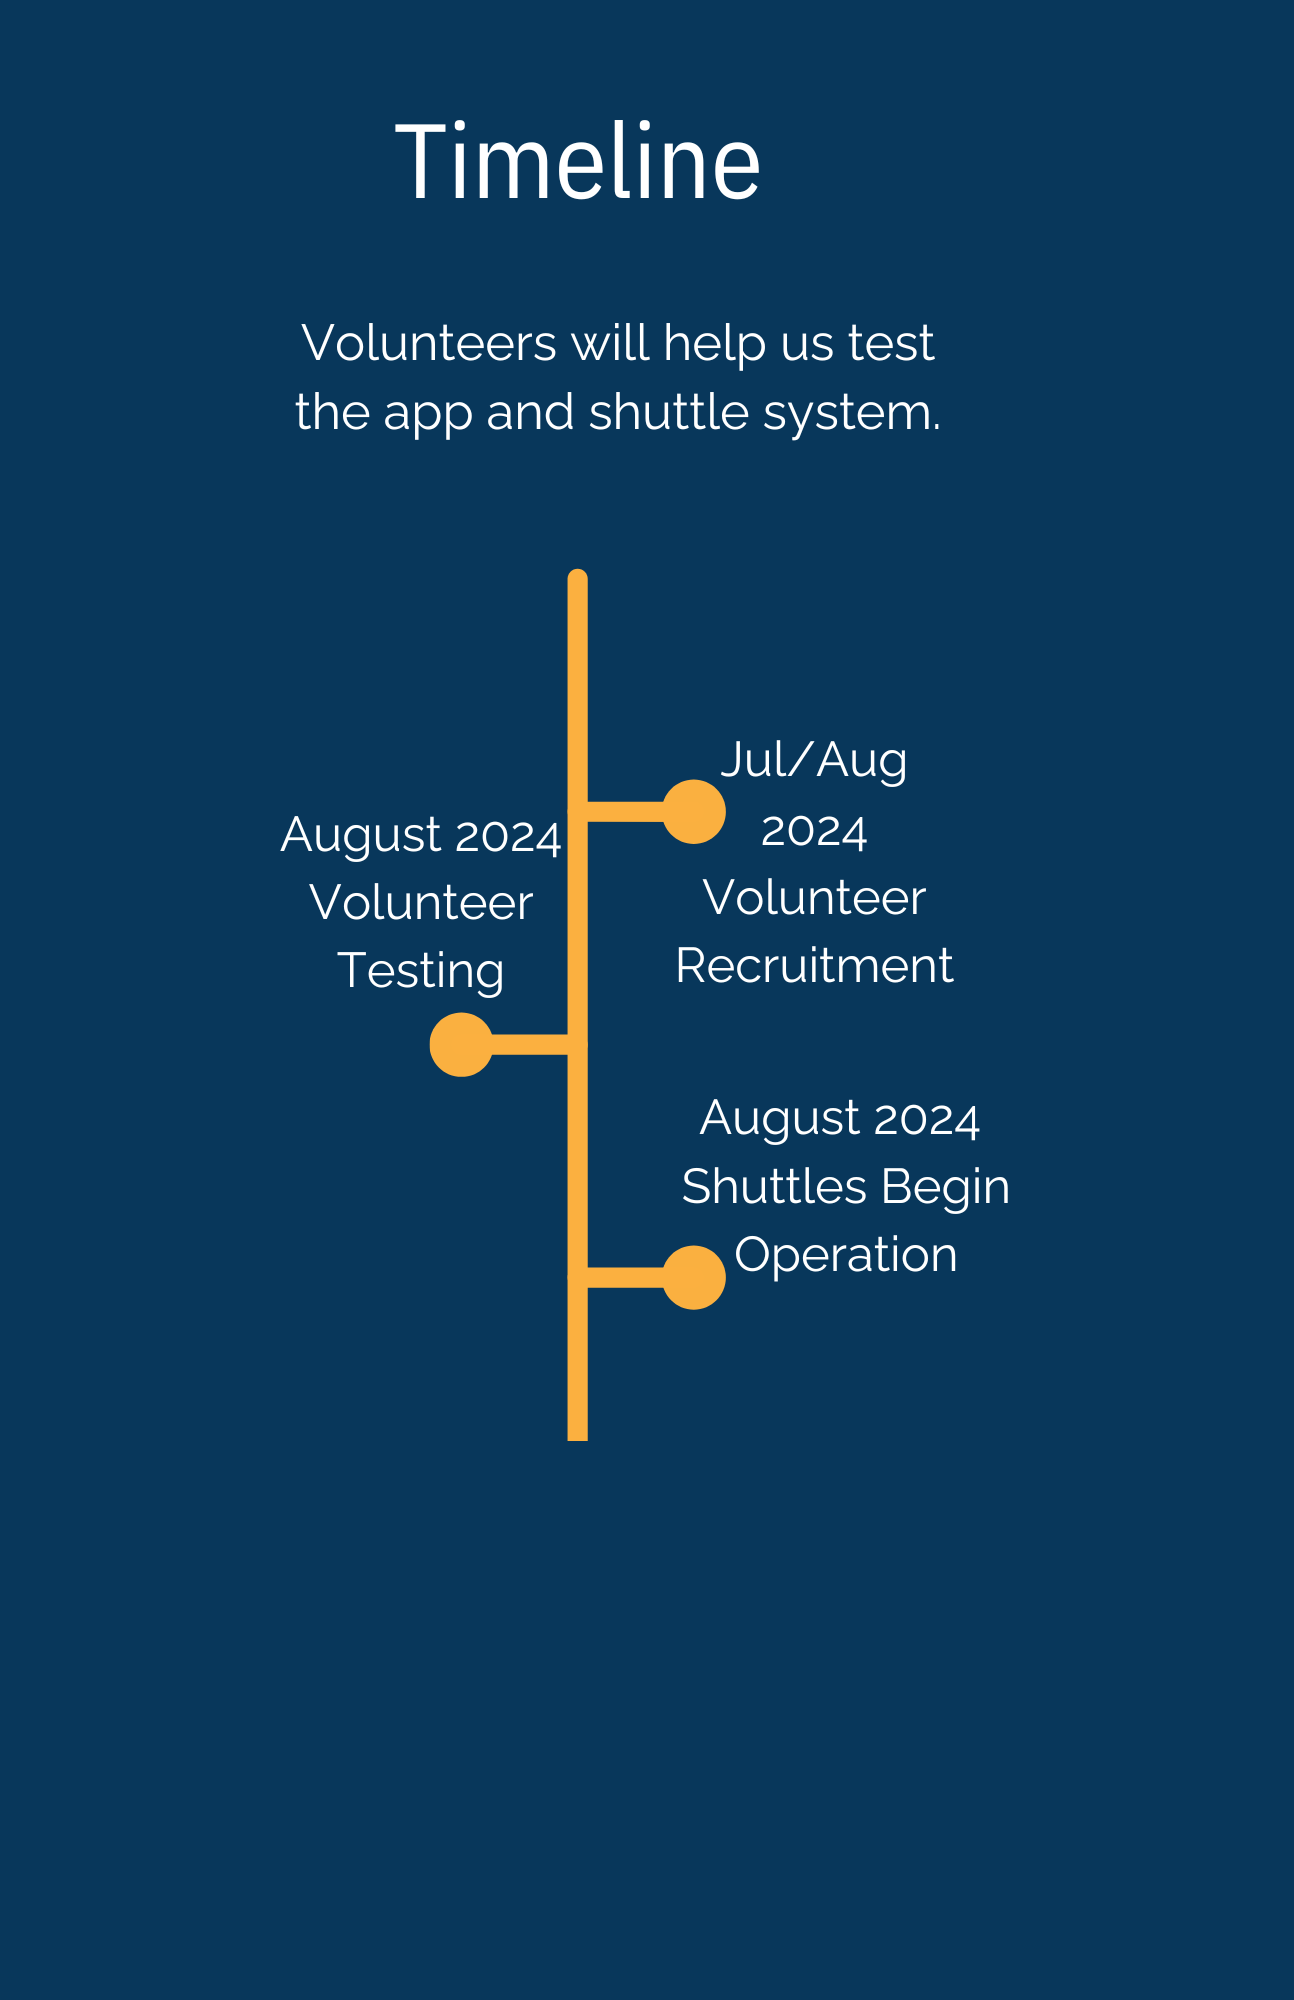 Image shows a timeline showing that system testing will begin in August. Shuttles also begin operation in August
